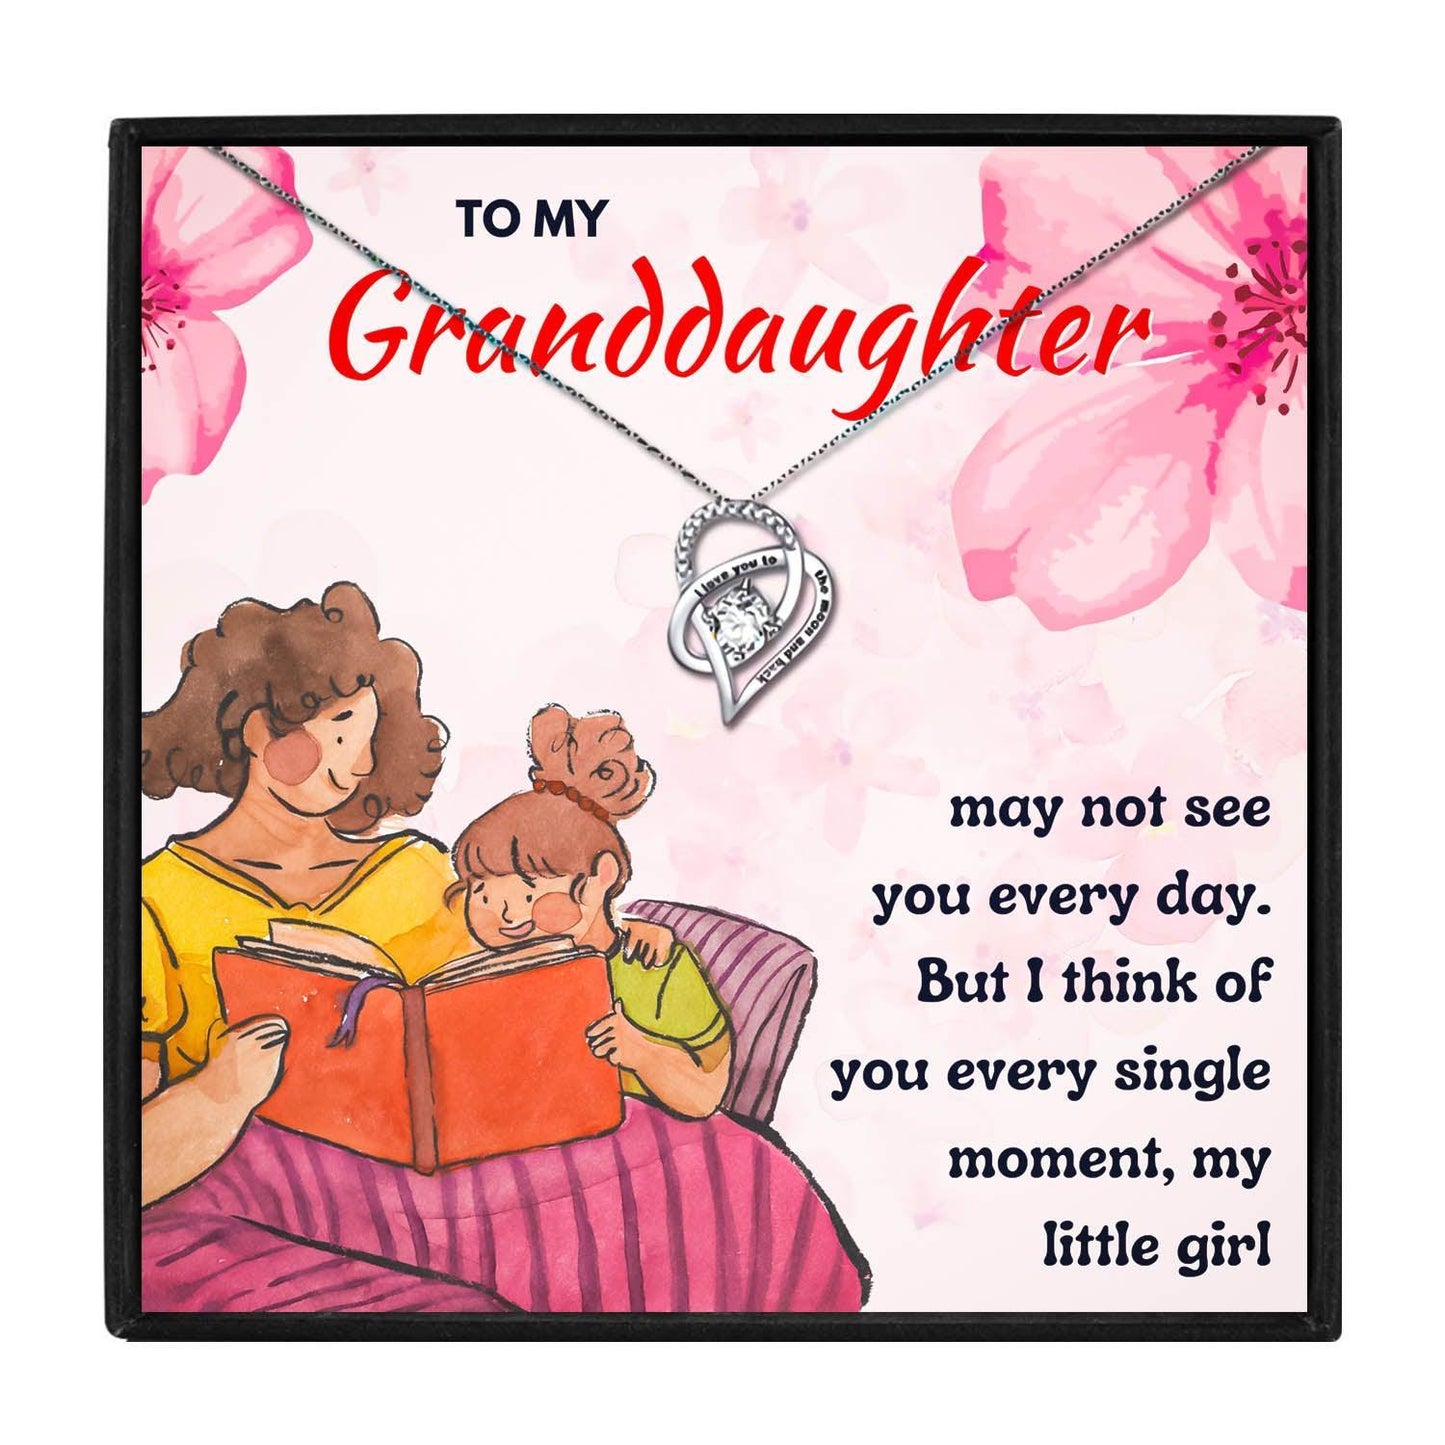 Special Gifts For Granddaughters From Grandma for Christmas 2023 | Special Gifts For Granddaughters From Grandma - undefined | gifts for teenage granddaughter, graduation gifts for granddaughter, granddaughter necklace from grandma, special gifts for granddaughters, unique granddaughter gifts | From Hunny Life | hunnylife.com